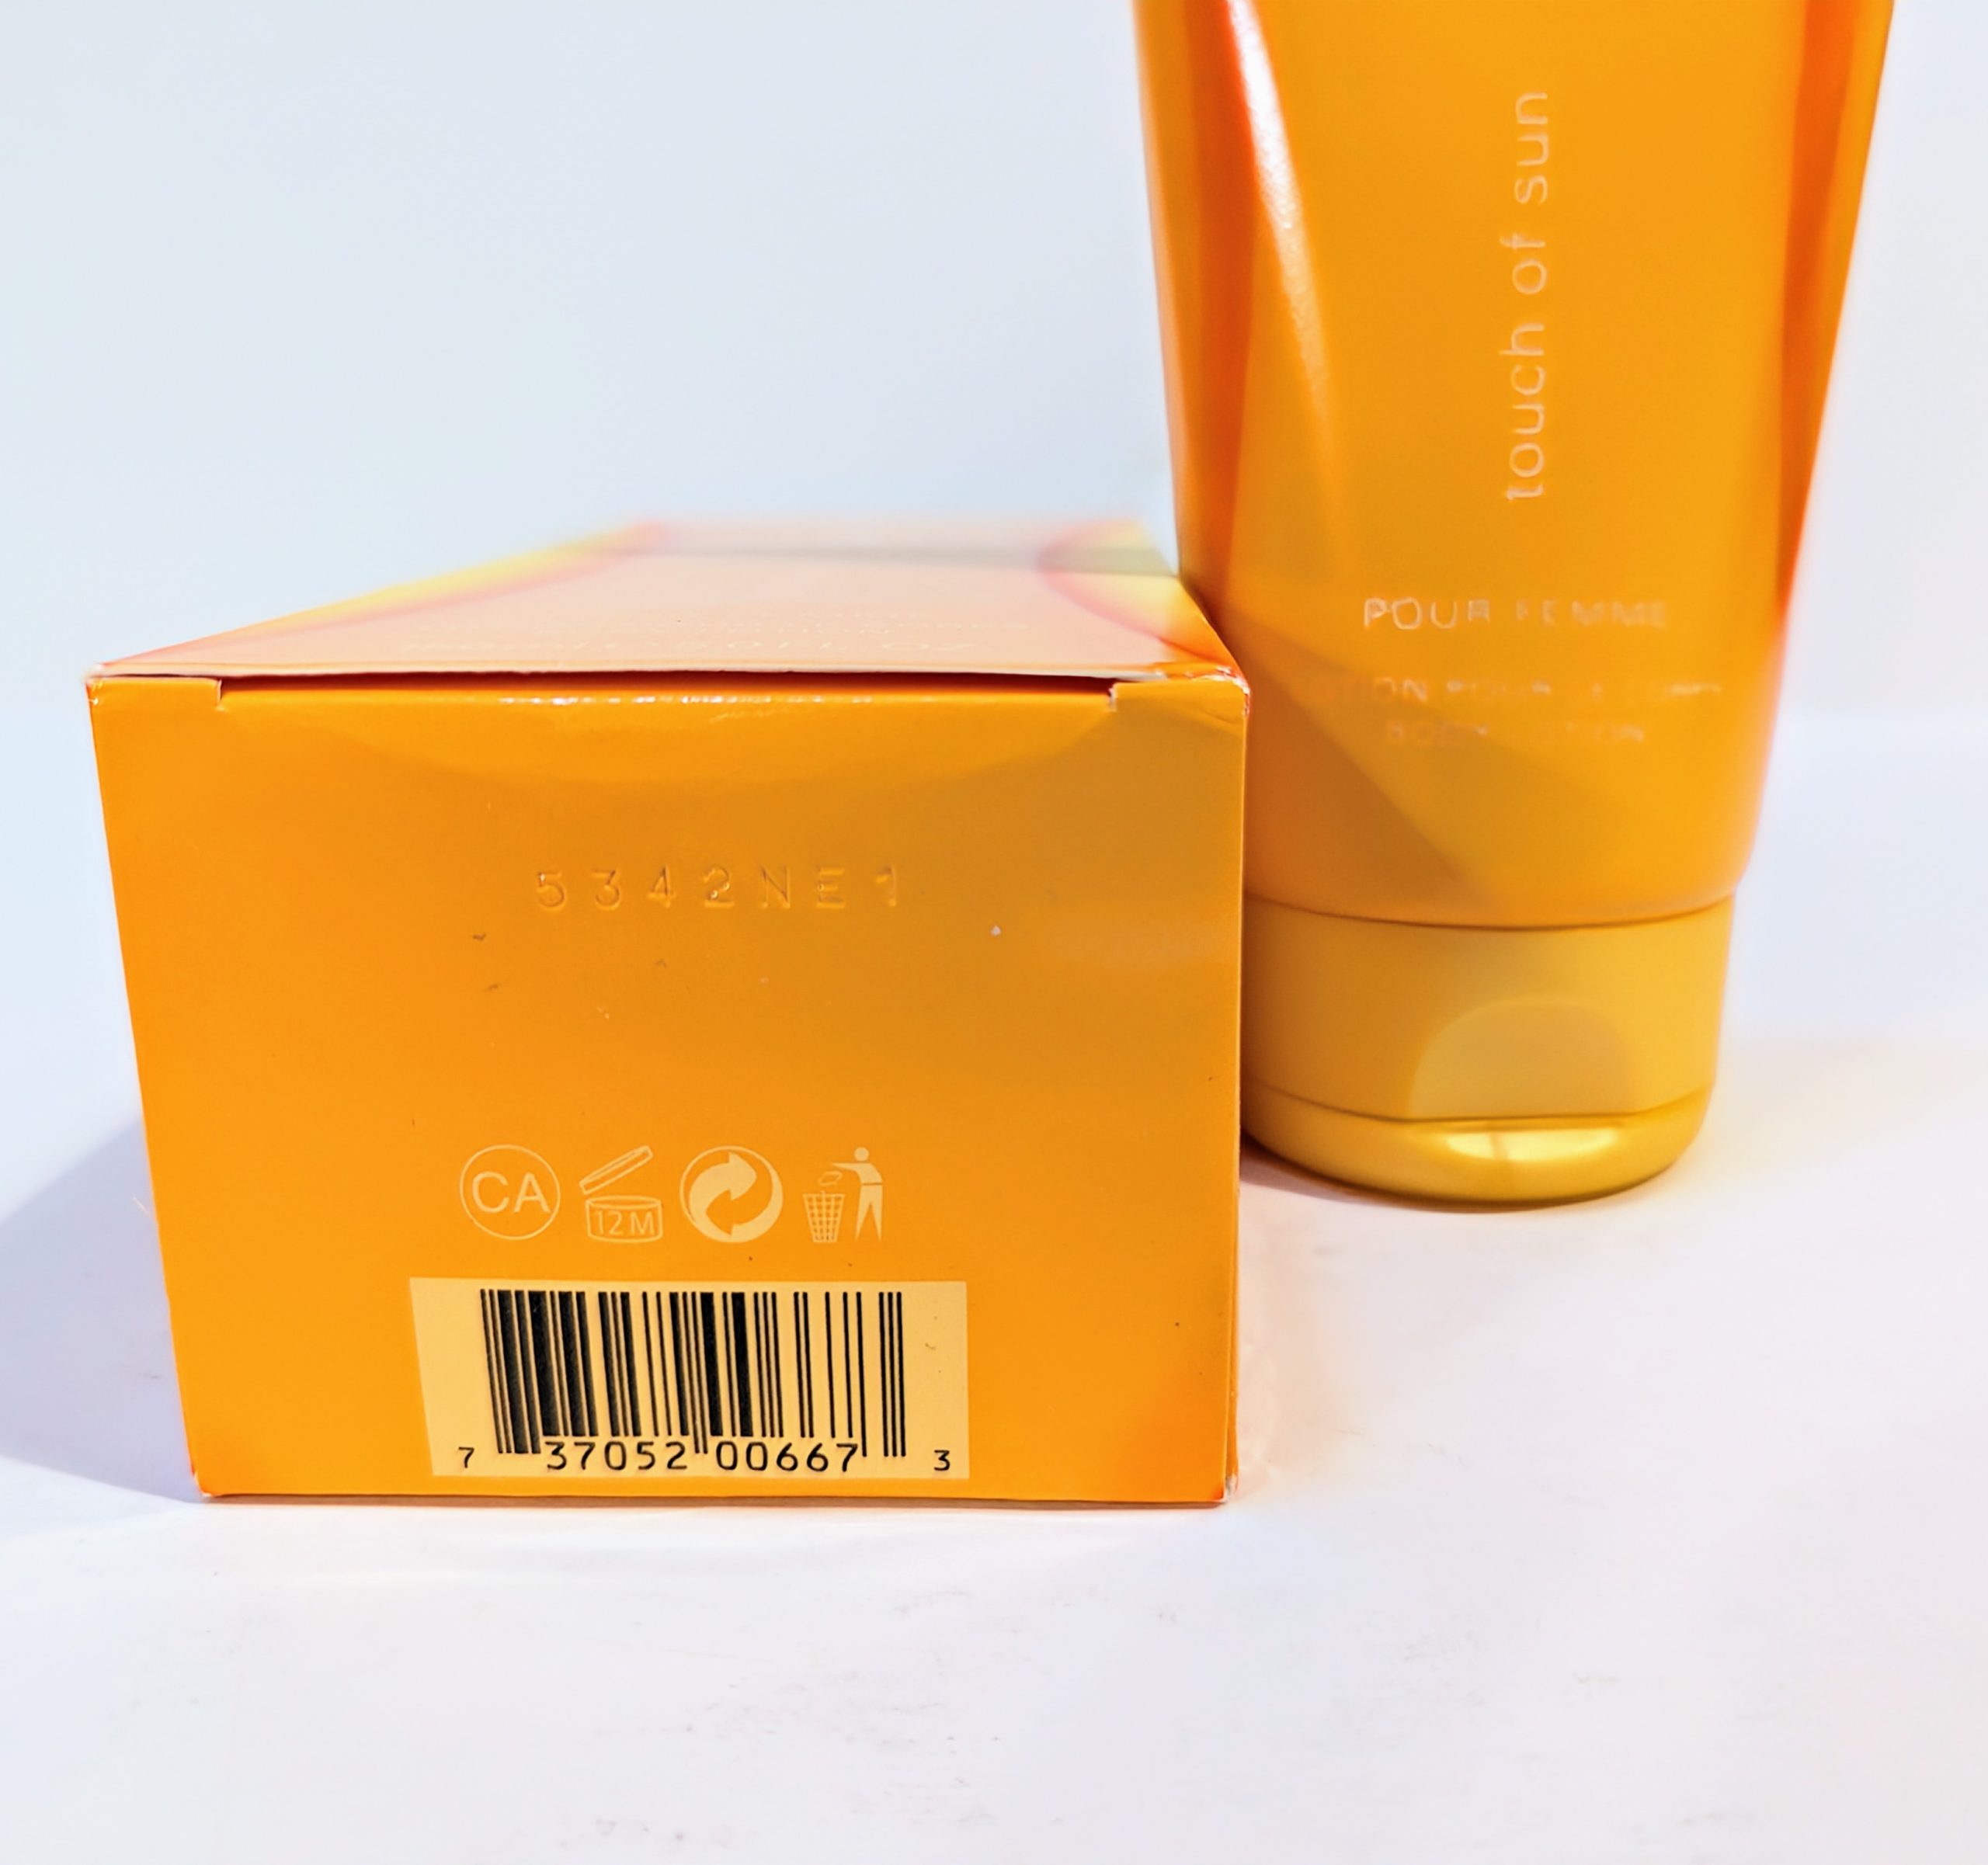 Close-up of an orange box and tube of a product labeled “touch of sun.” The box features a barcode and symbols for recycling, while the tube is partially visible in the background.